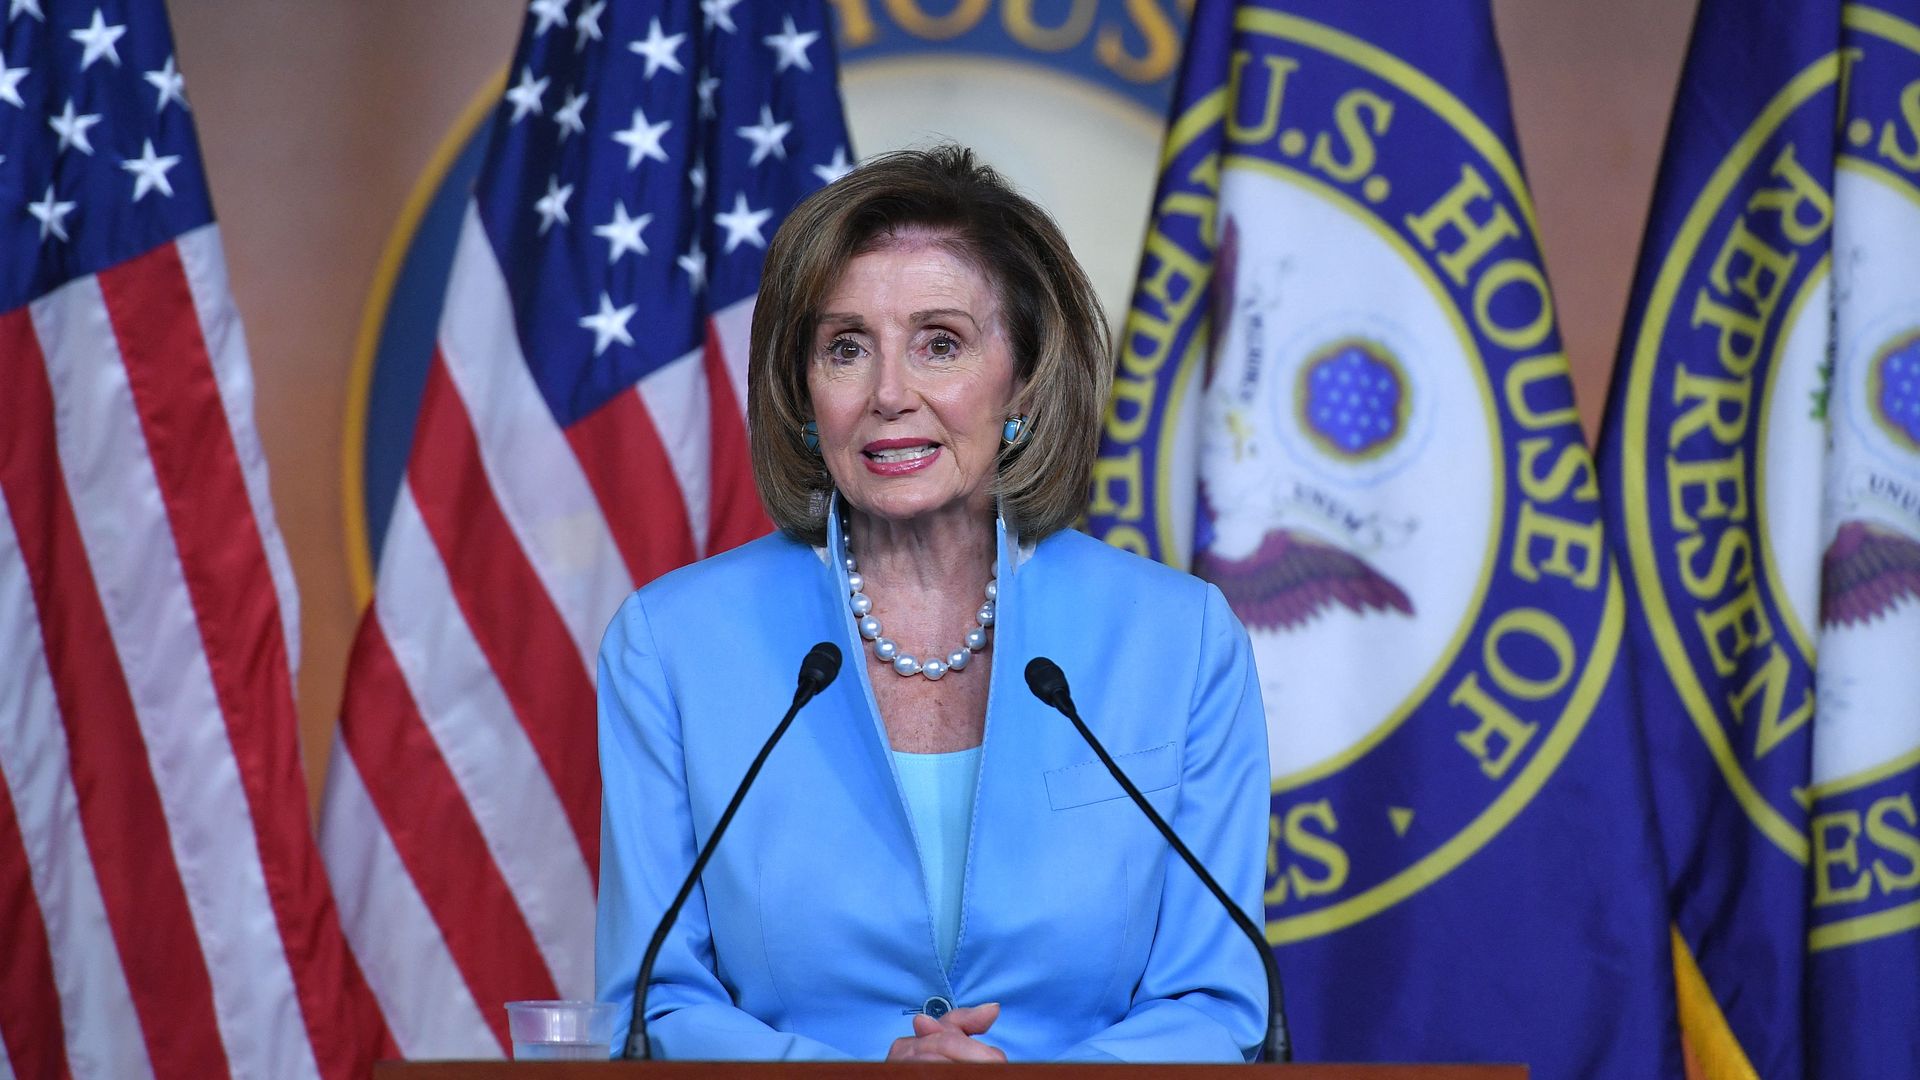 Speaker of the House, Nancy Pelosi, Democrat of California, speaks during her weekly press briefing on Capitol Hill in Washington, DC, on August 6, 2021